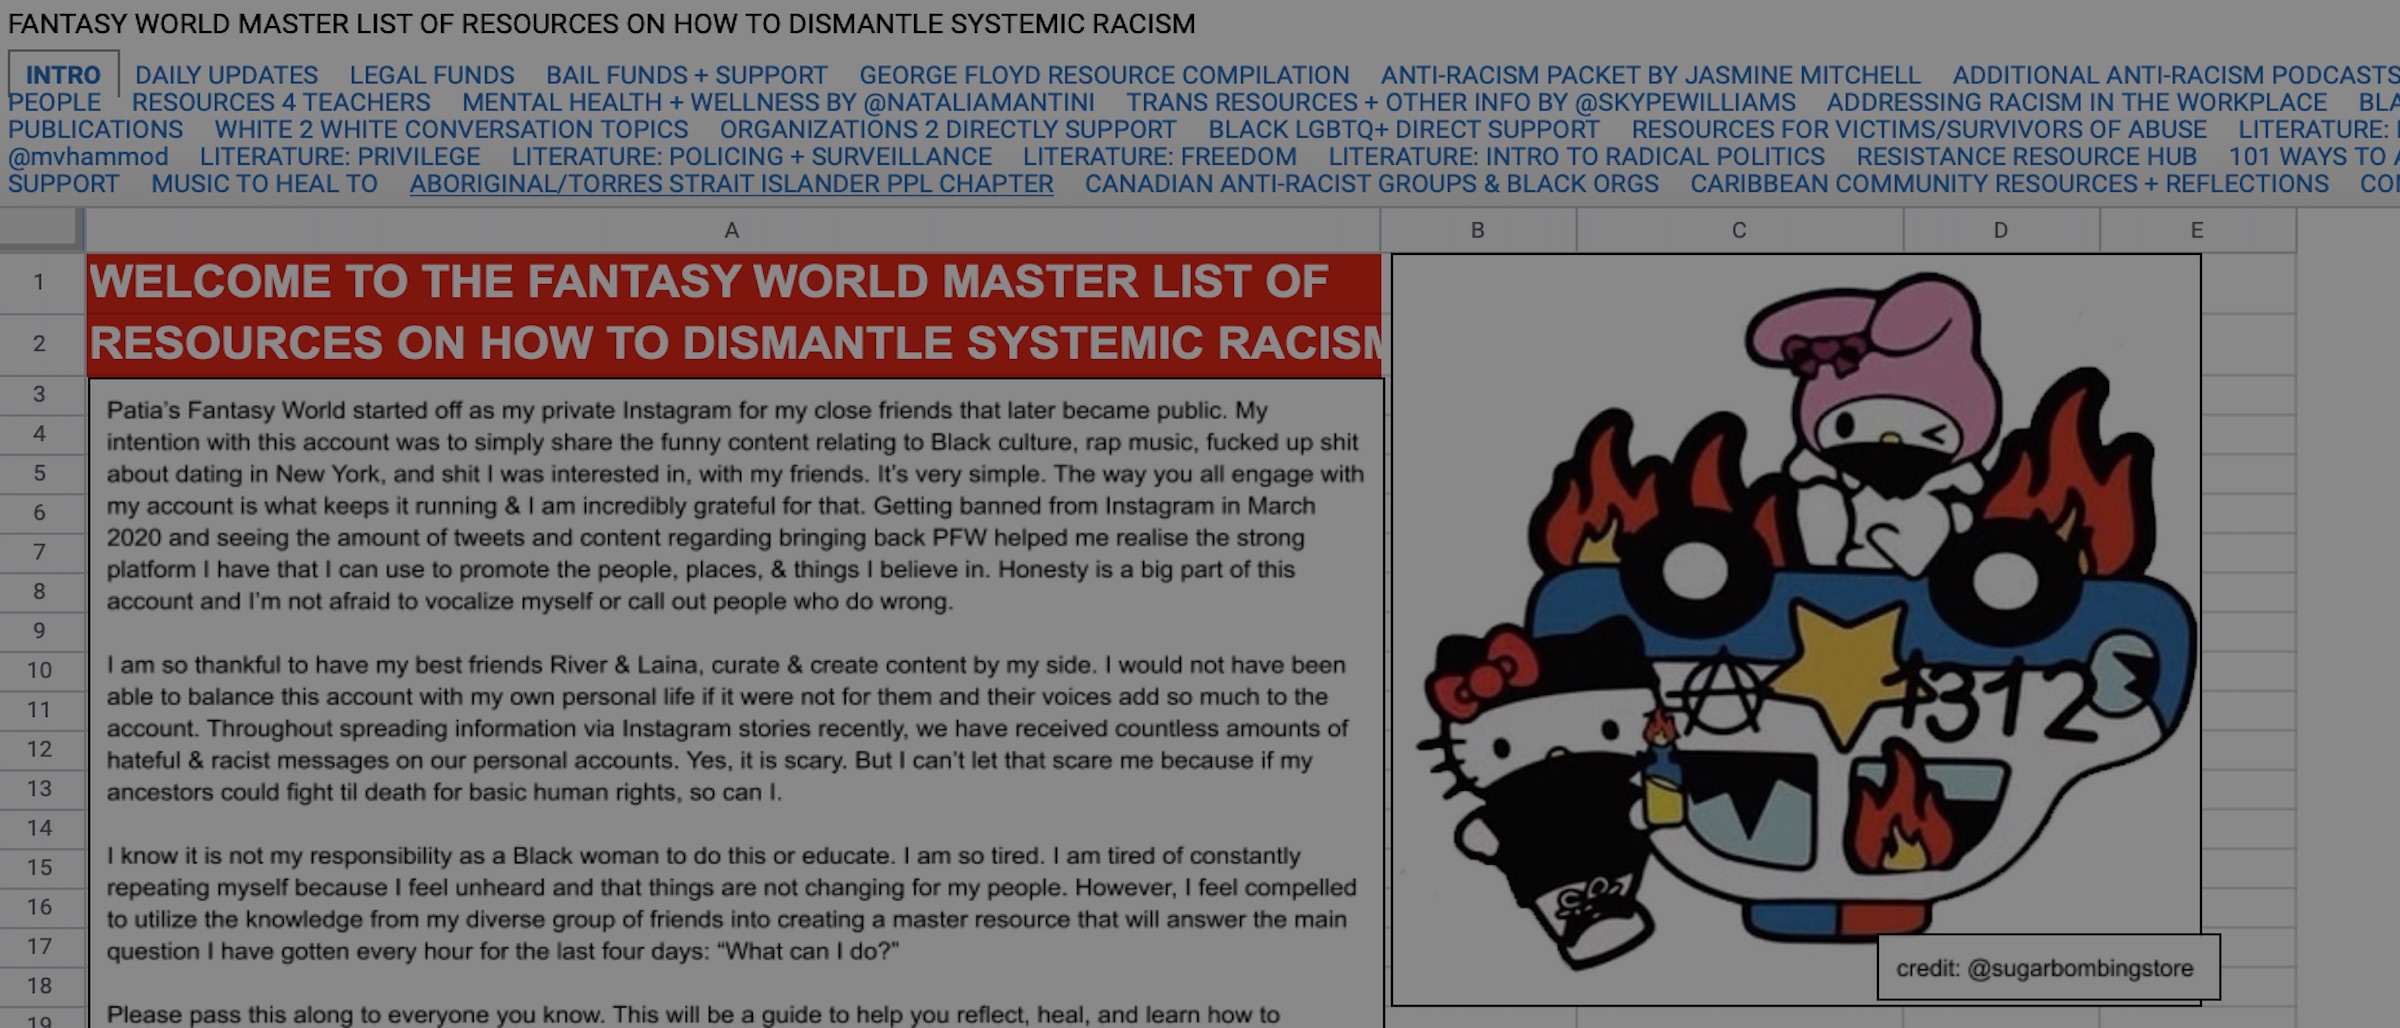 Dismantle Systemic Racism Using This Robust Index by Patia’s Fantasy World